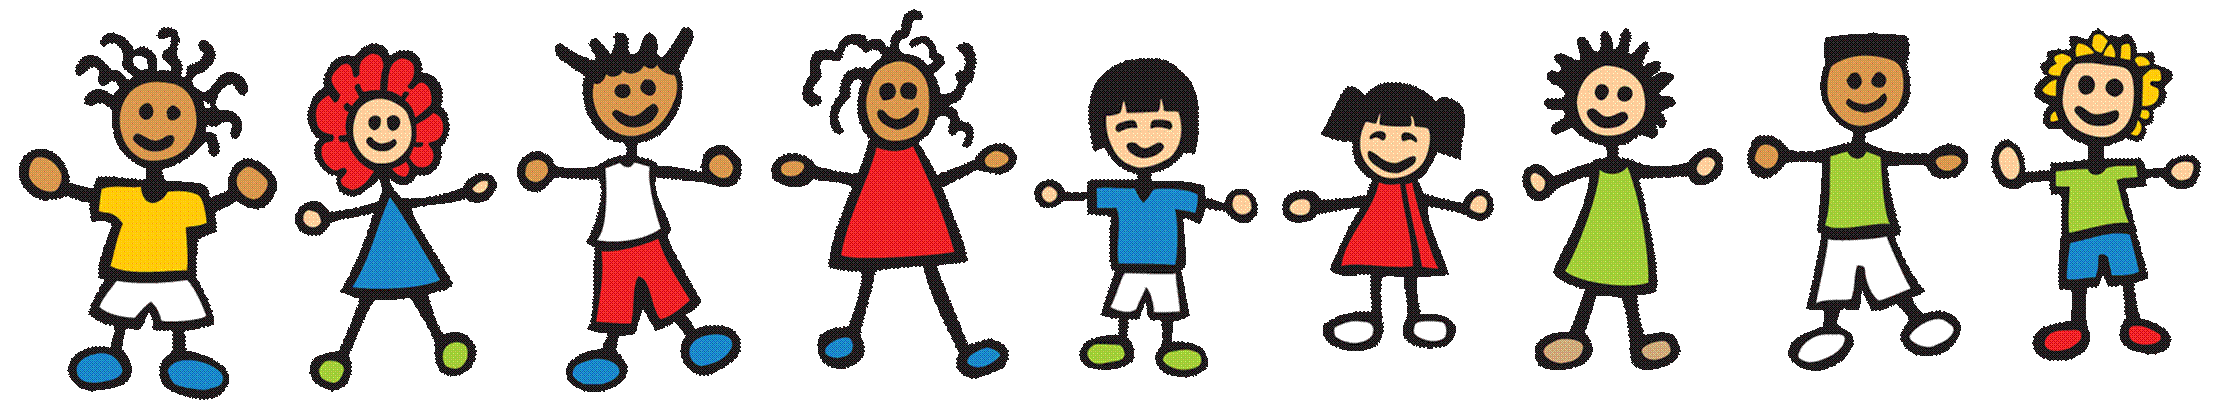 Daycare Clipart & Daycare Clip Art Images.